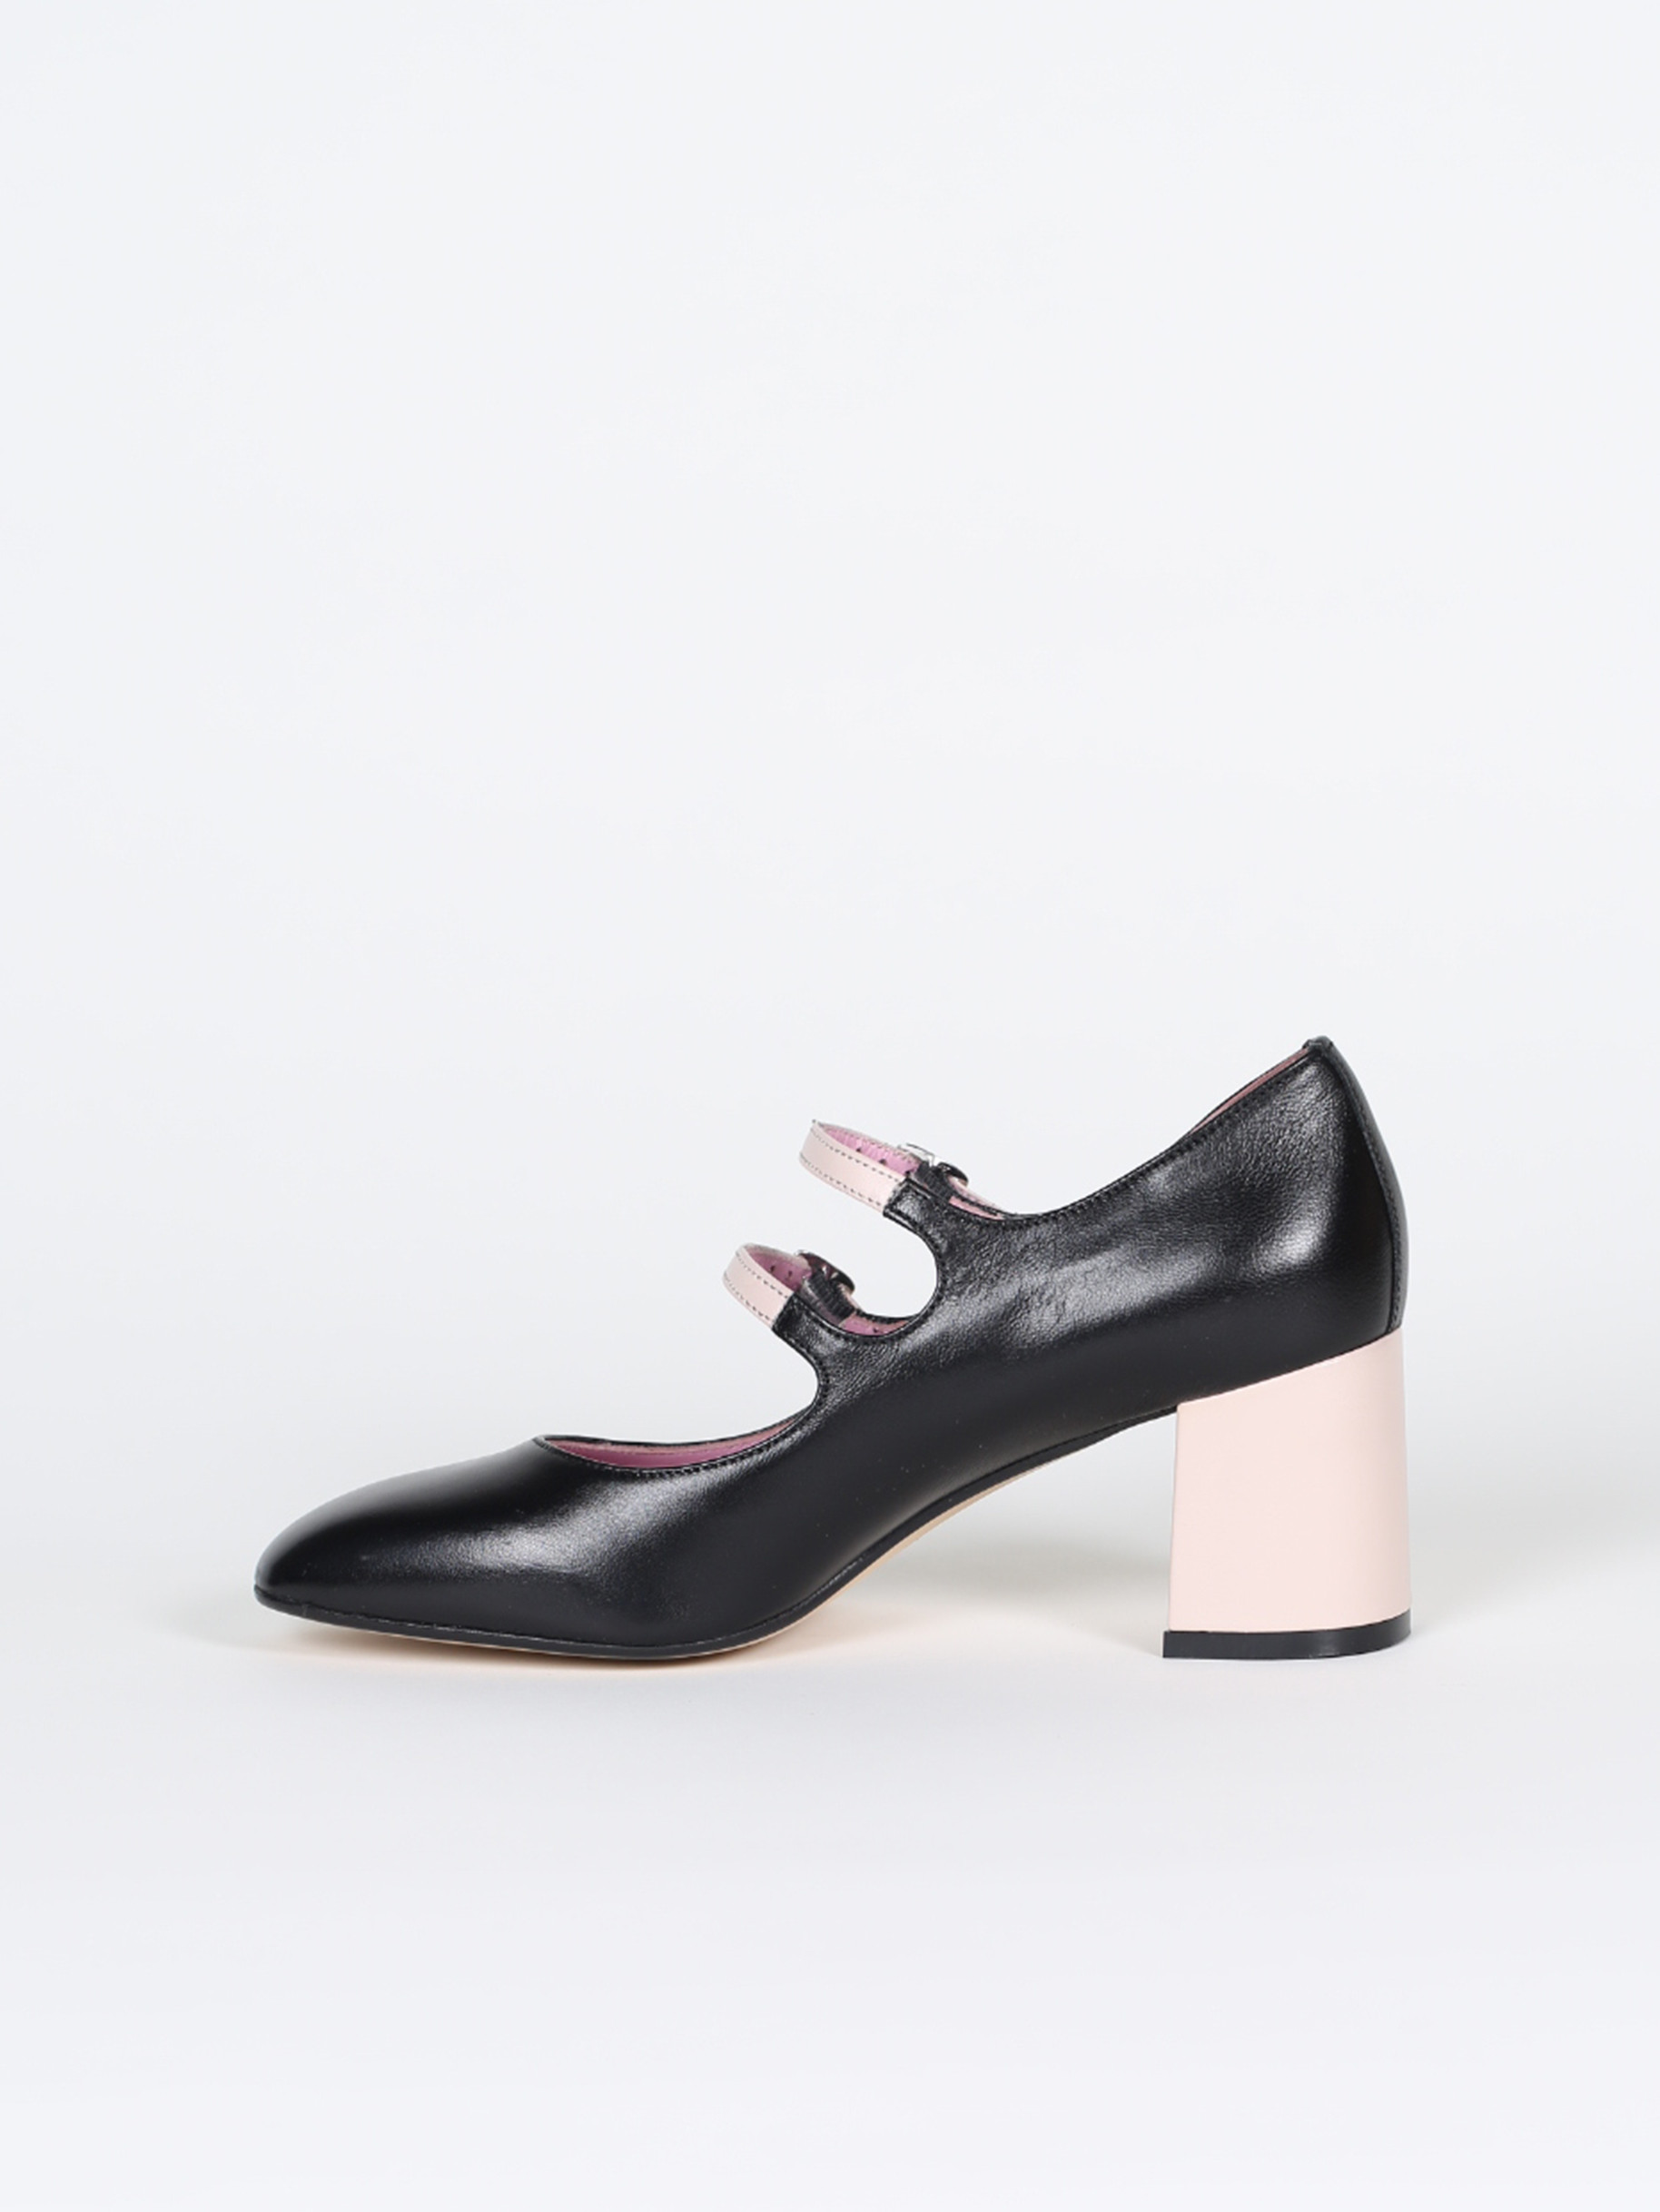 Black and pink leather Mary Janes